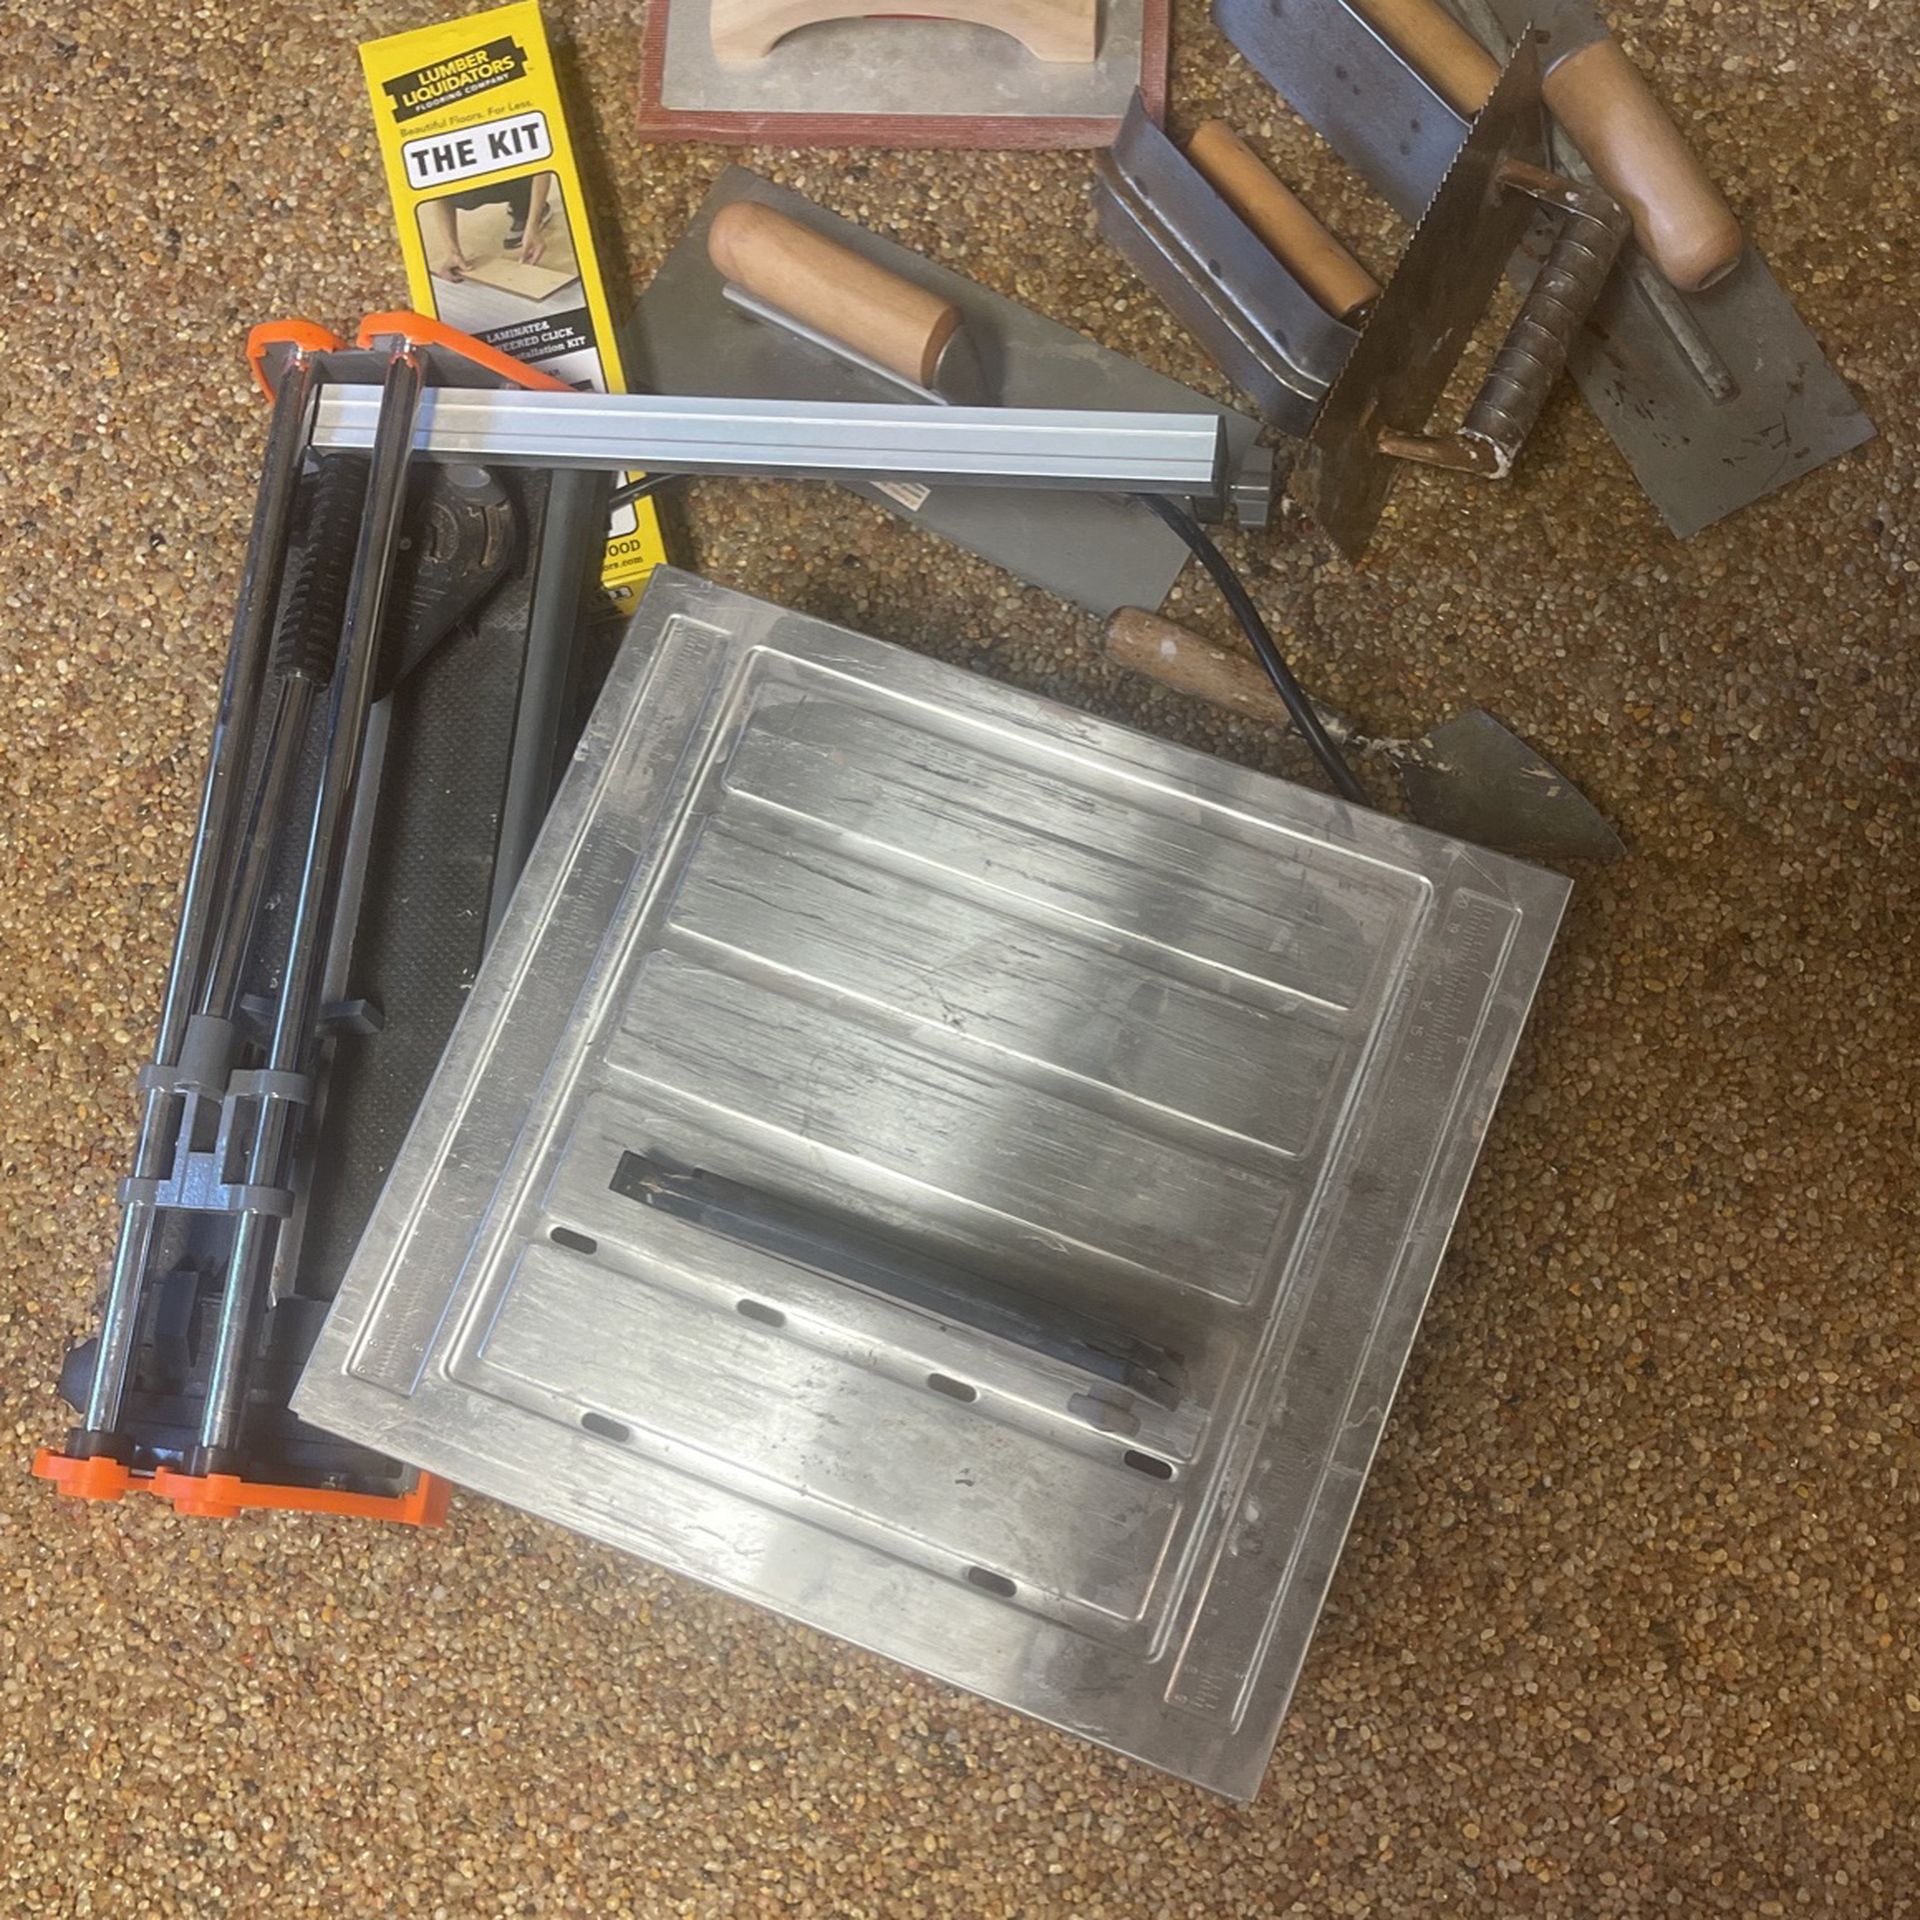 Tile Saw, Tile Cutter, Various Tile/grout Tools